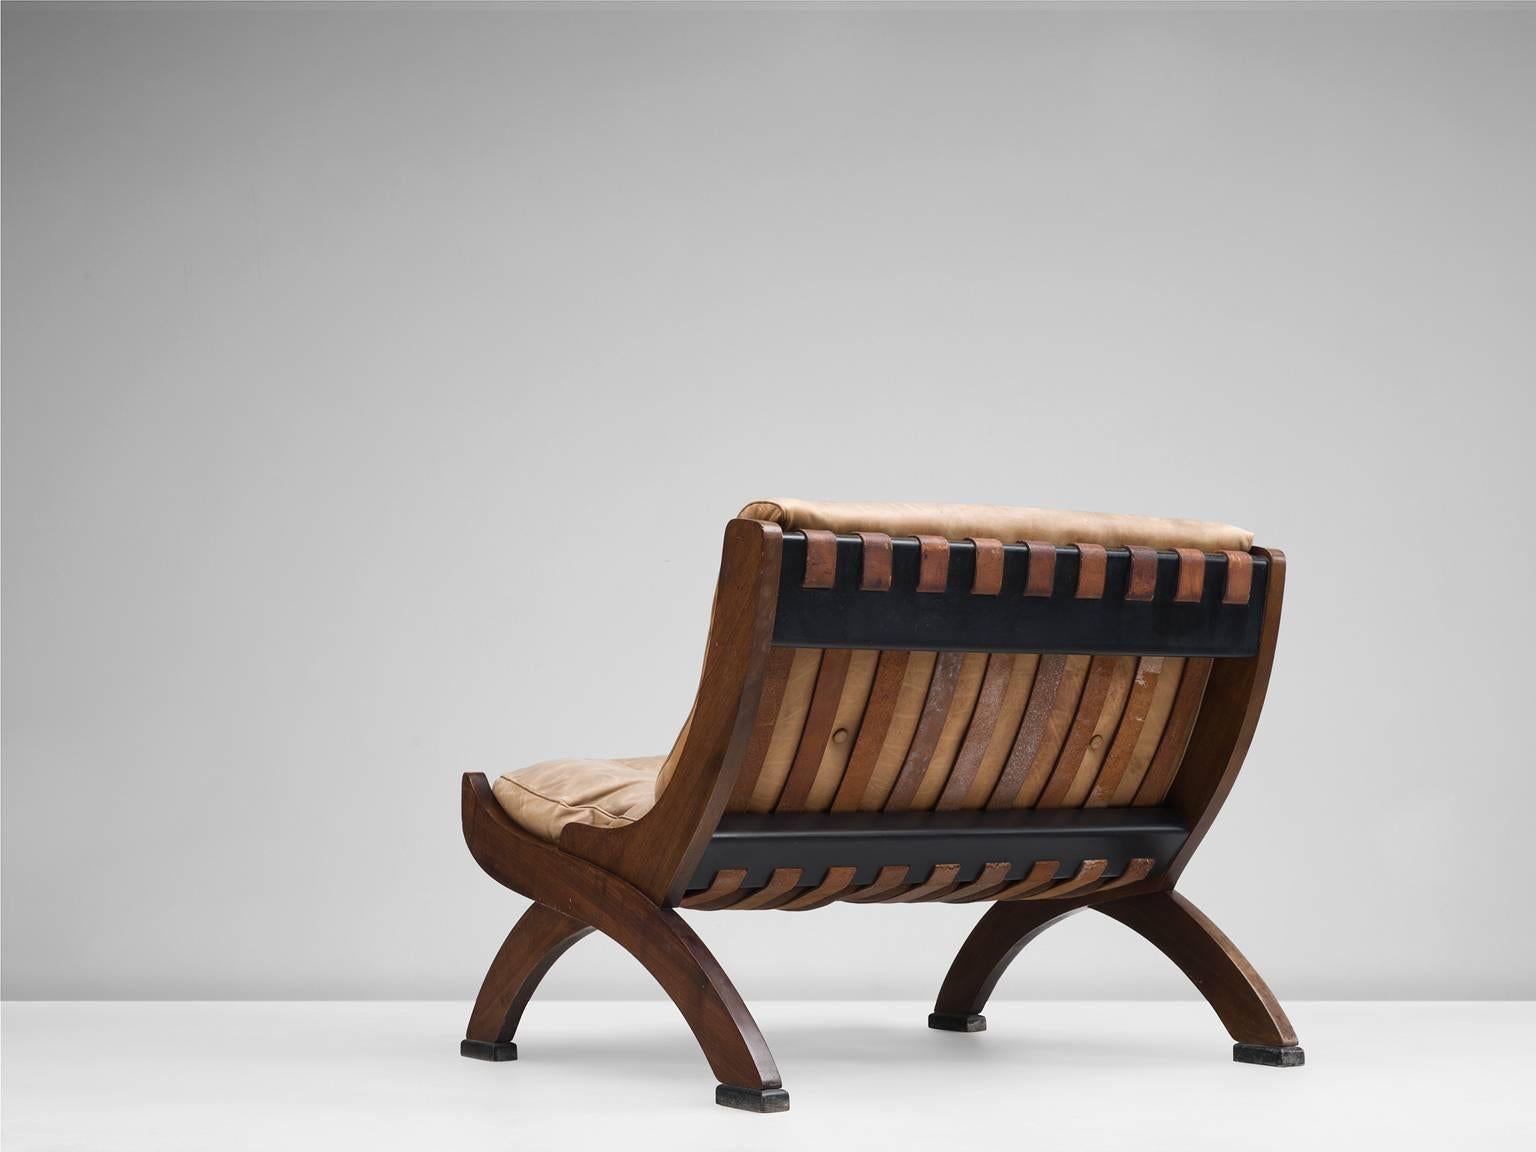 Italian M. Comolli Lounge Chair in Walnut and a Light Brown Leather